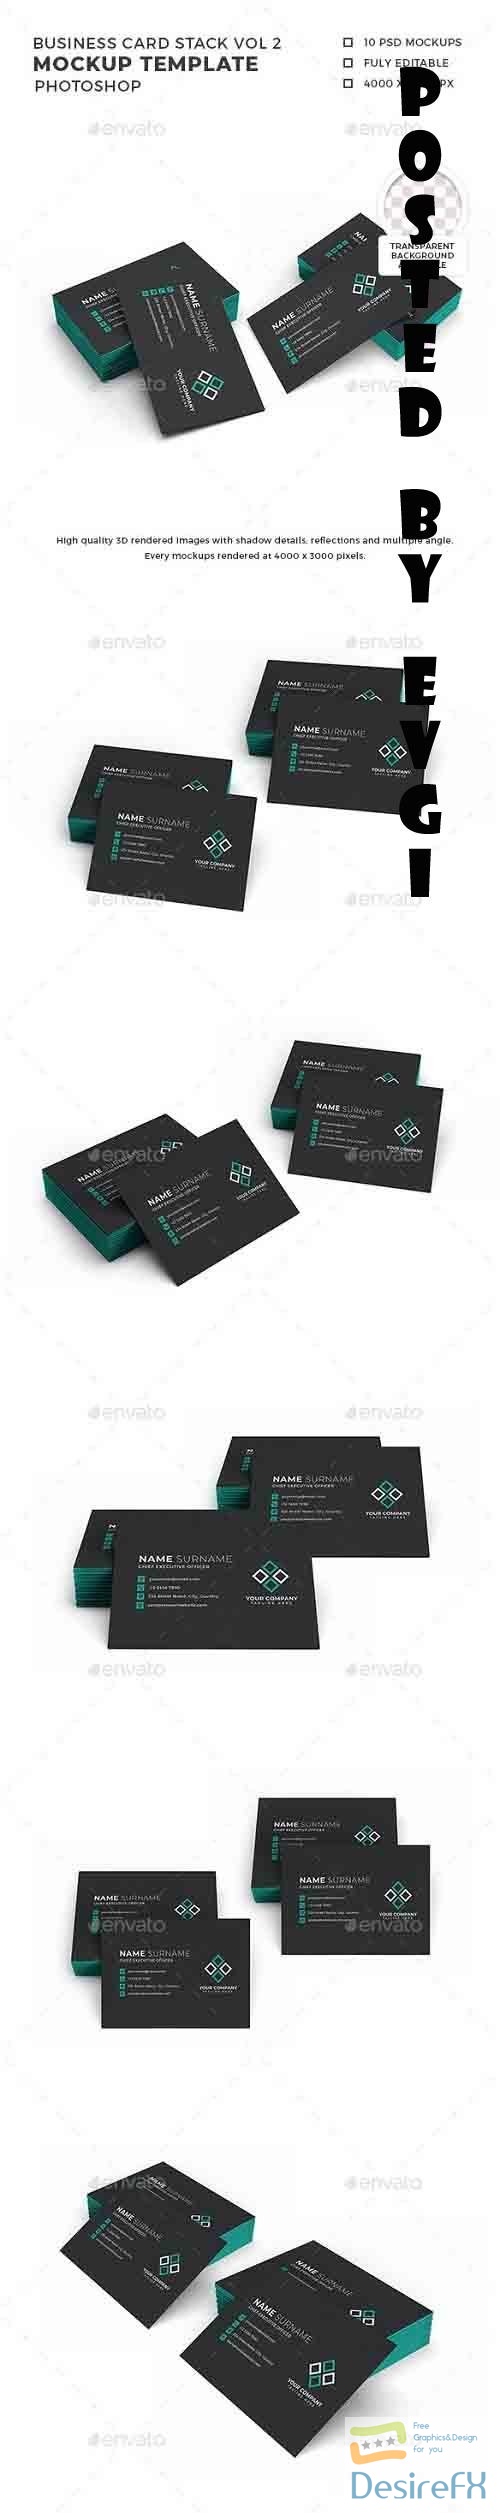 Business Card Stack Mockup Template Vol 2 - 32444758